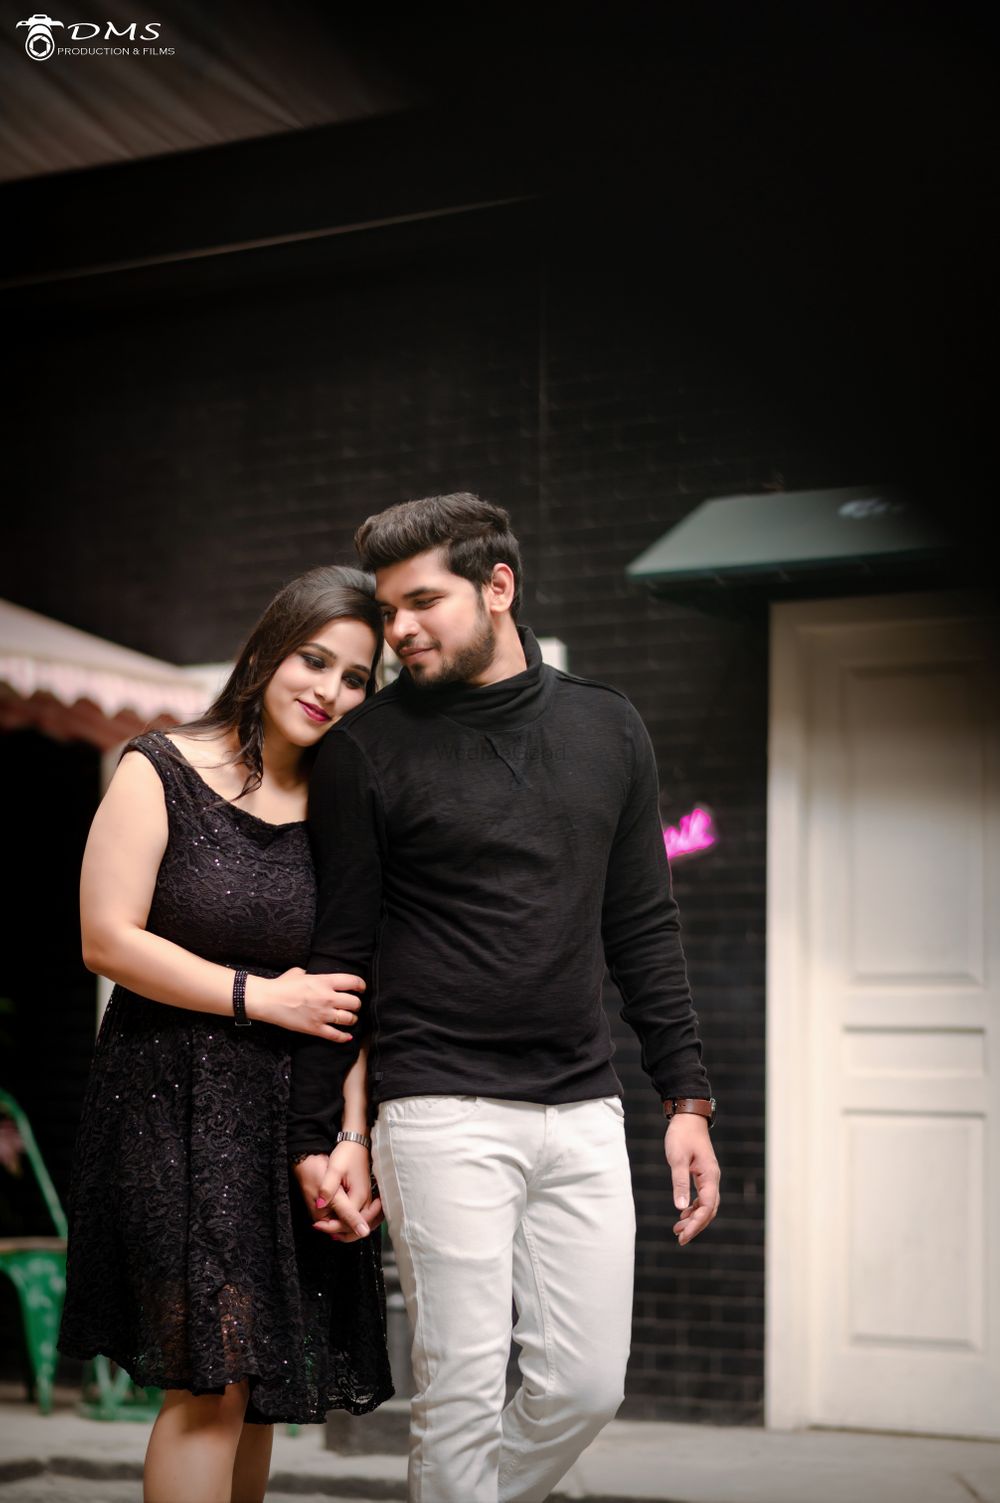 Photo From Abhisekh's Prewedding - By DMS Productions And Films